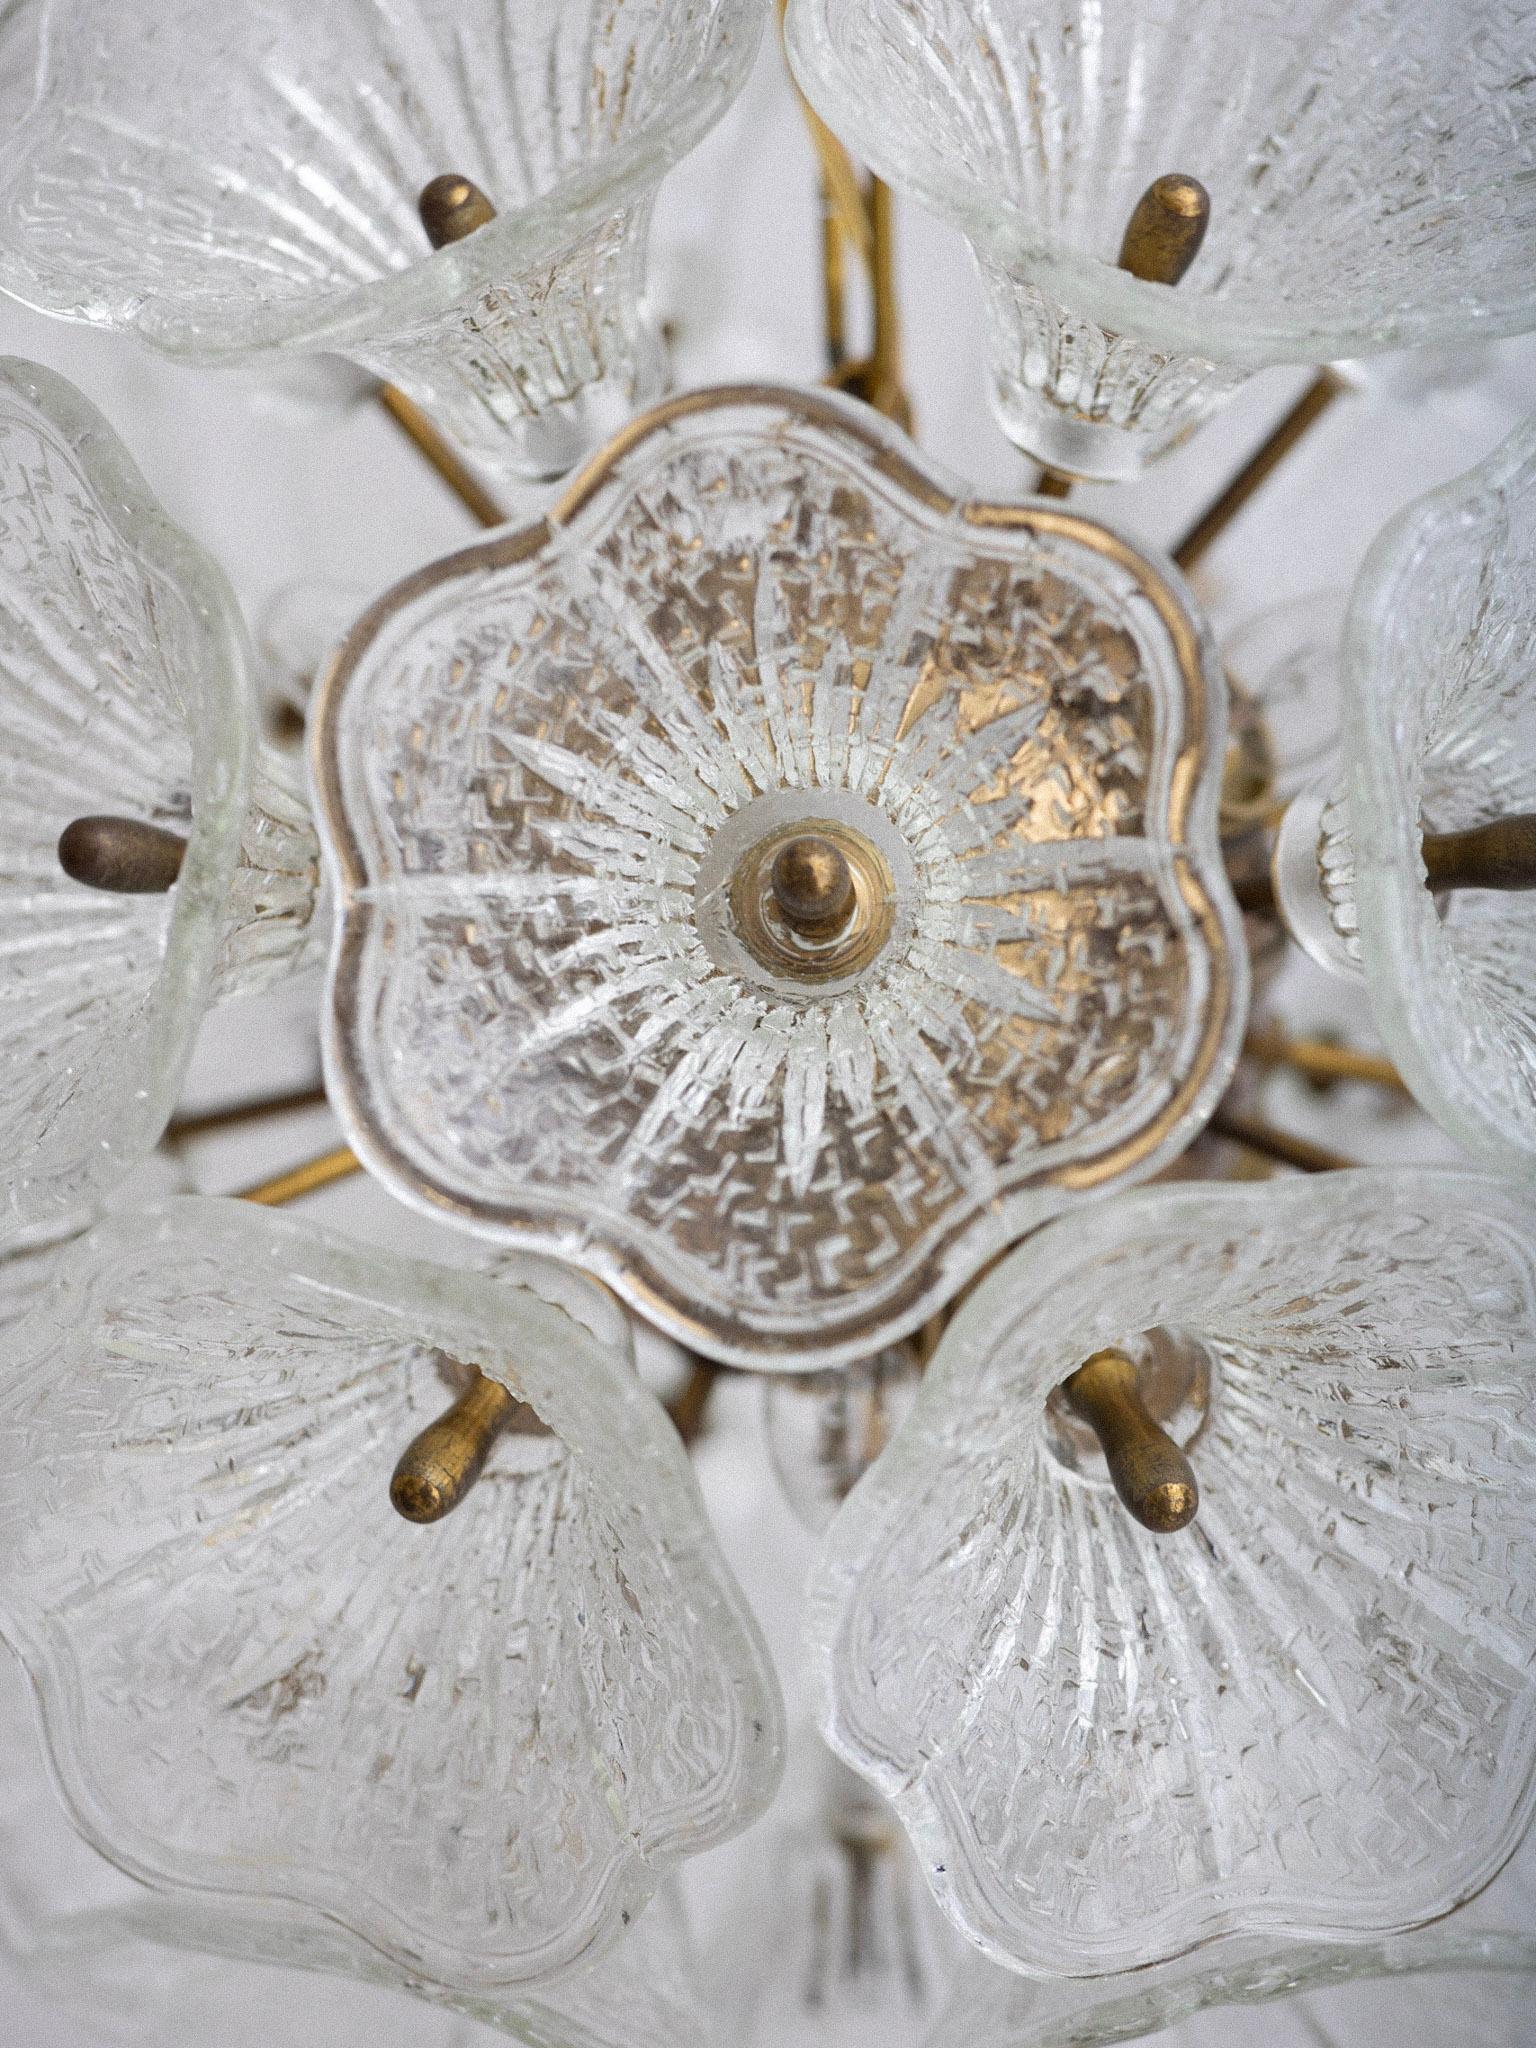 Mid-20th Century Murano Glass Flower Sputnik Chandelier Attributed to Paolo Venini for VeArt